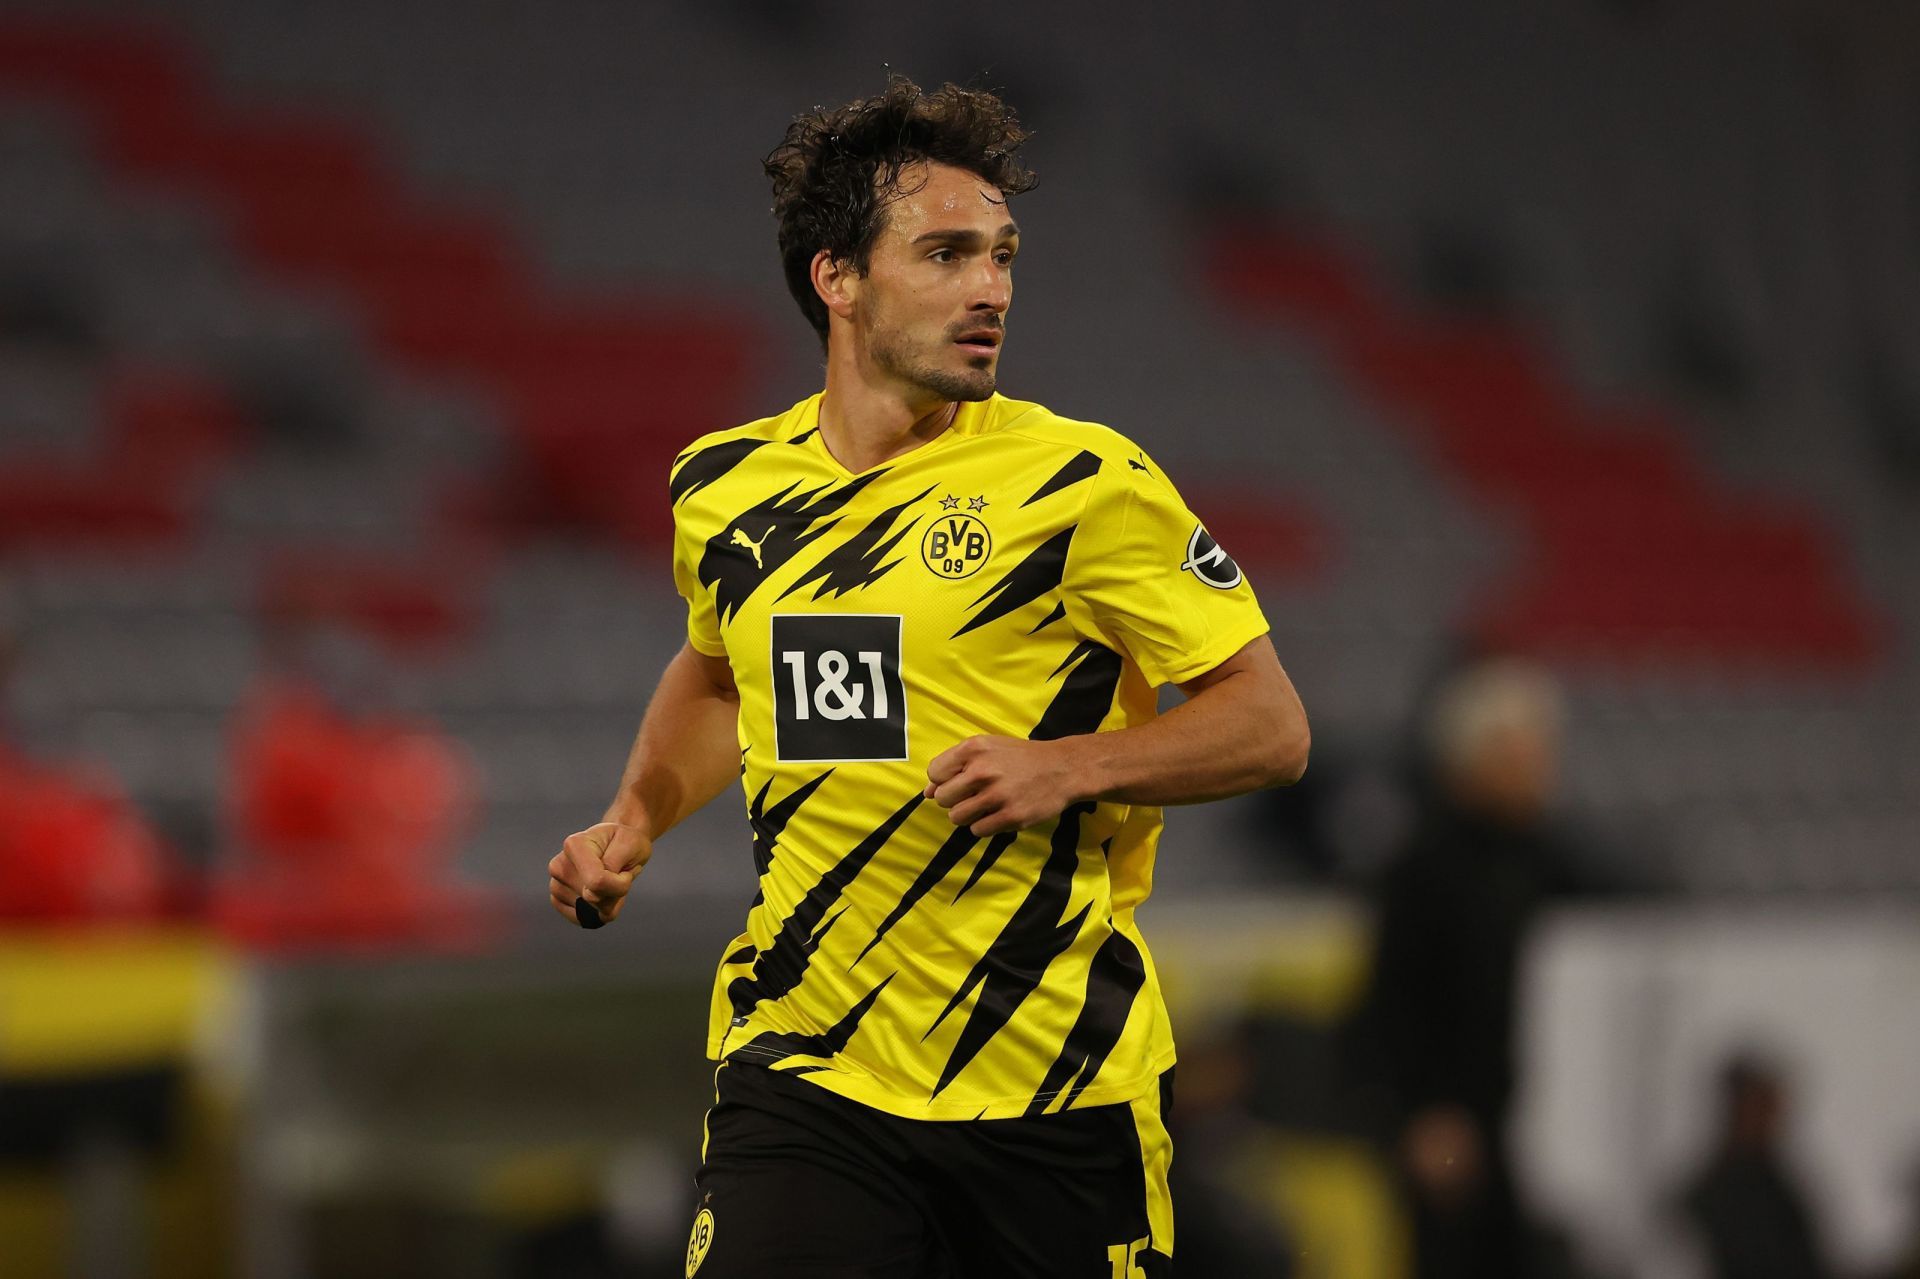 Hummels has been a reliable figure for Dortmund